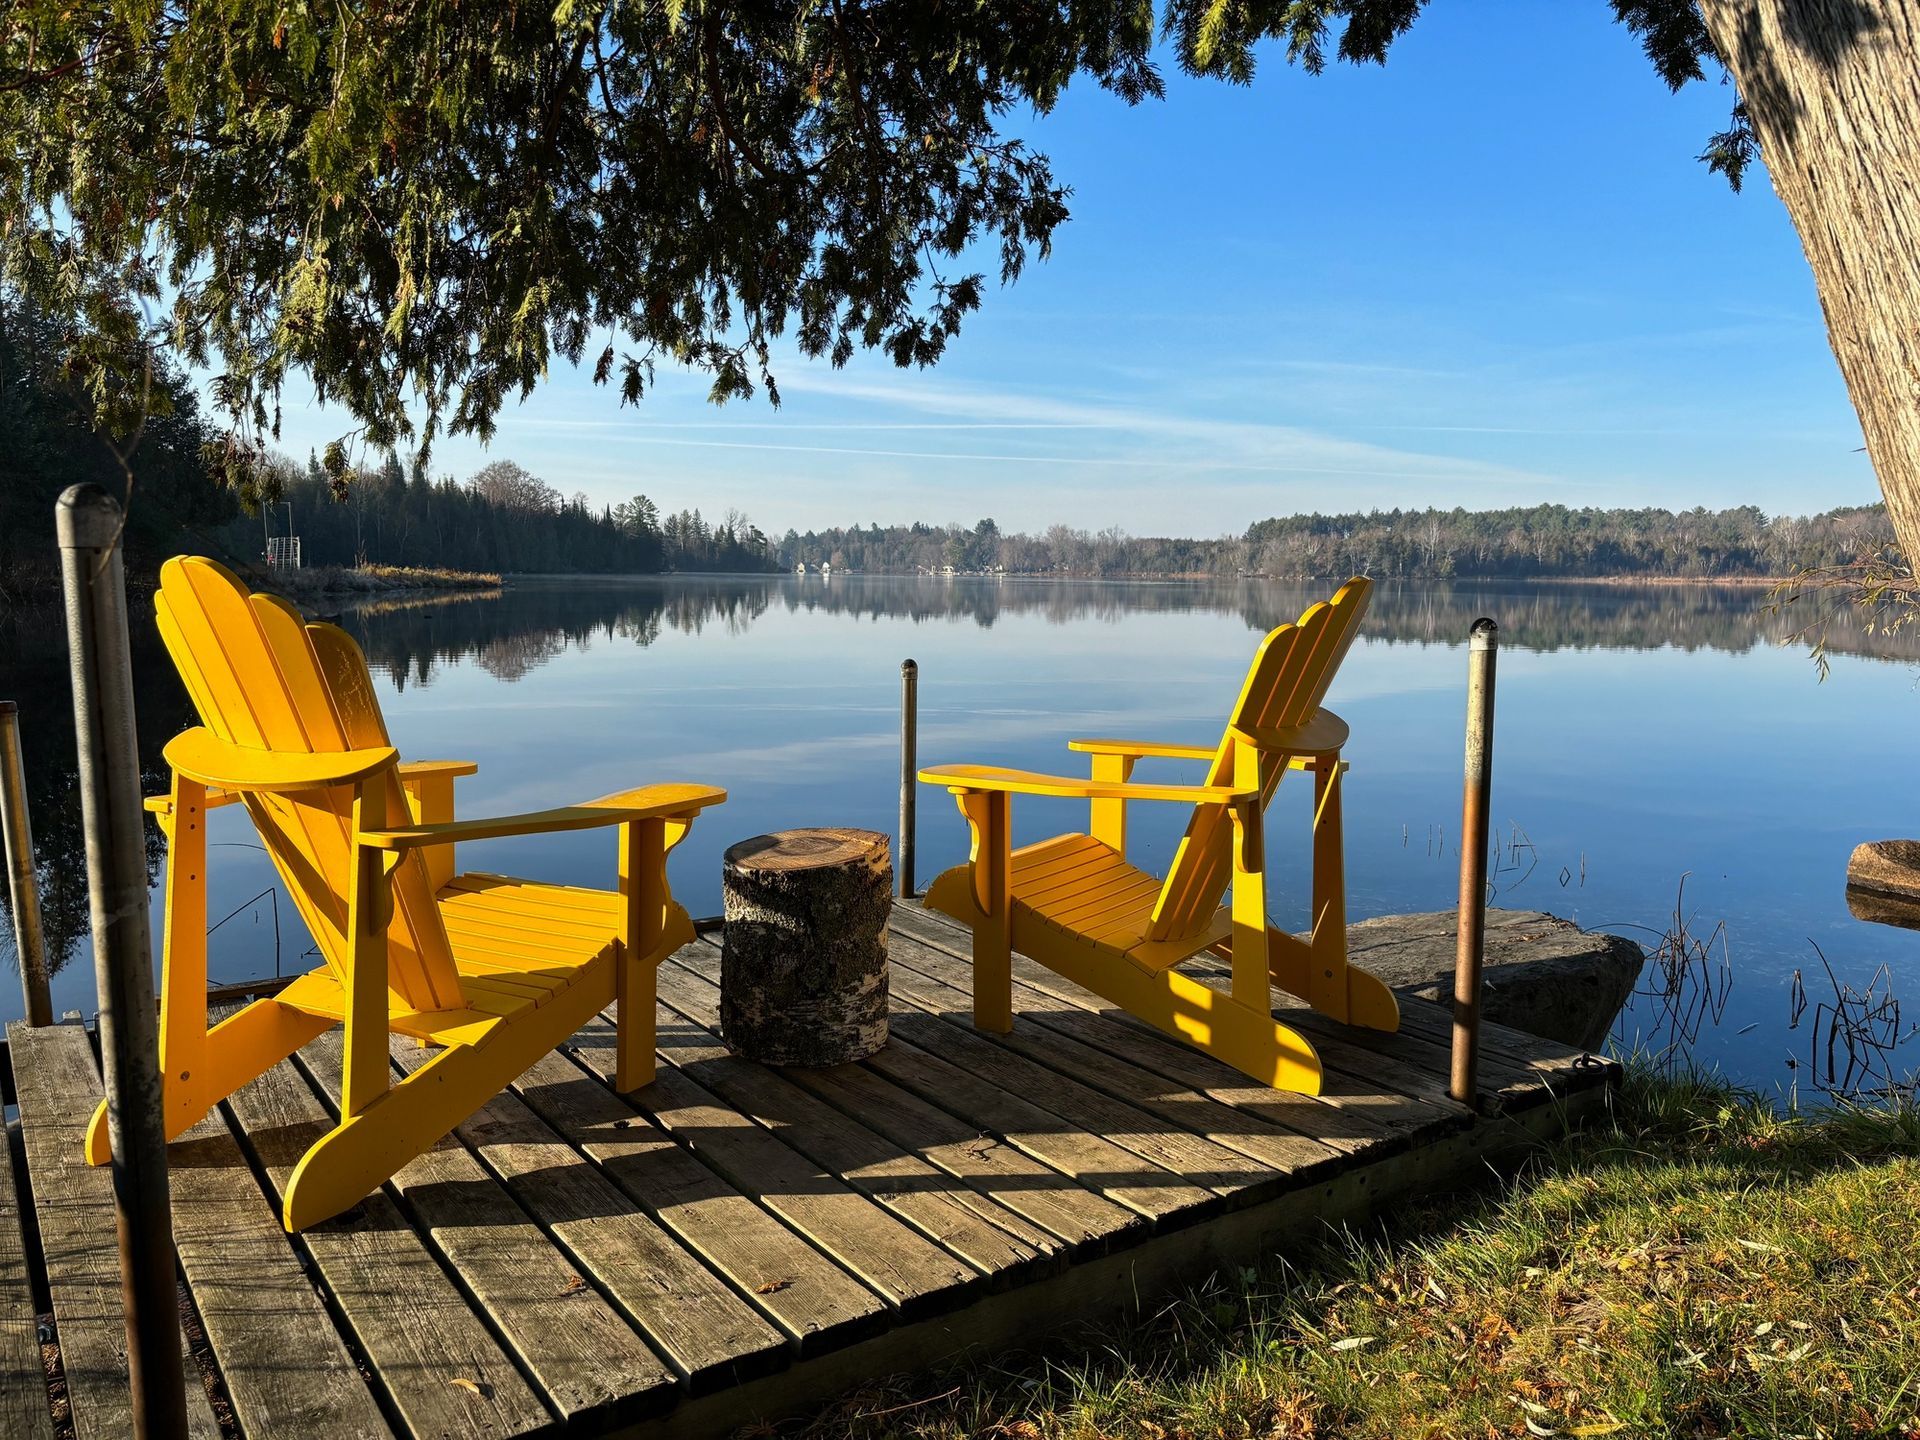 Two yellow adirondack chairs on a dock overlooking a lake